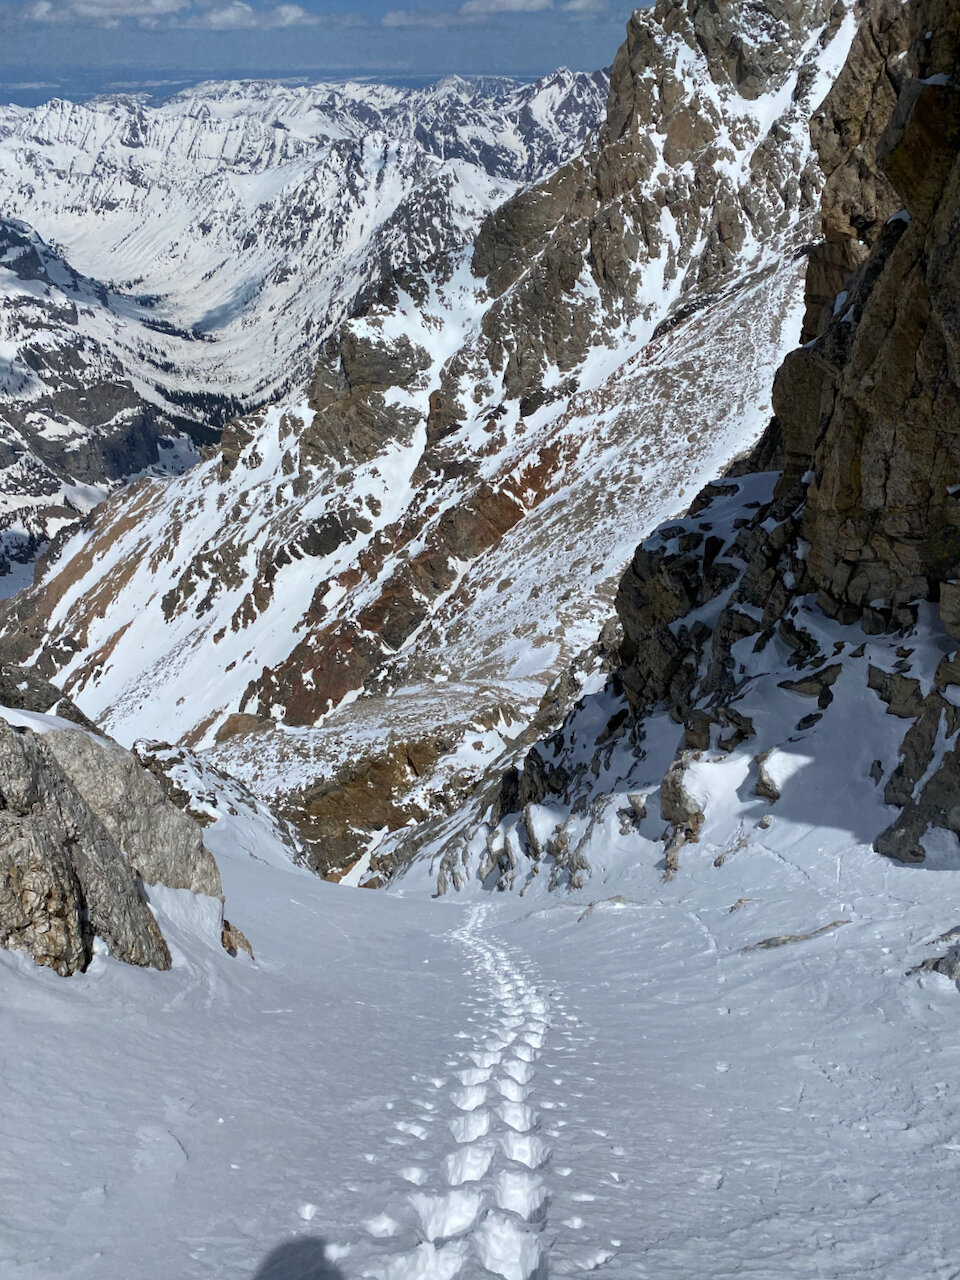 Looking back at the steep snow section of the NW Couloir